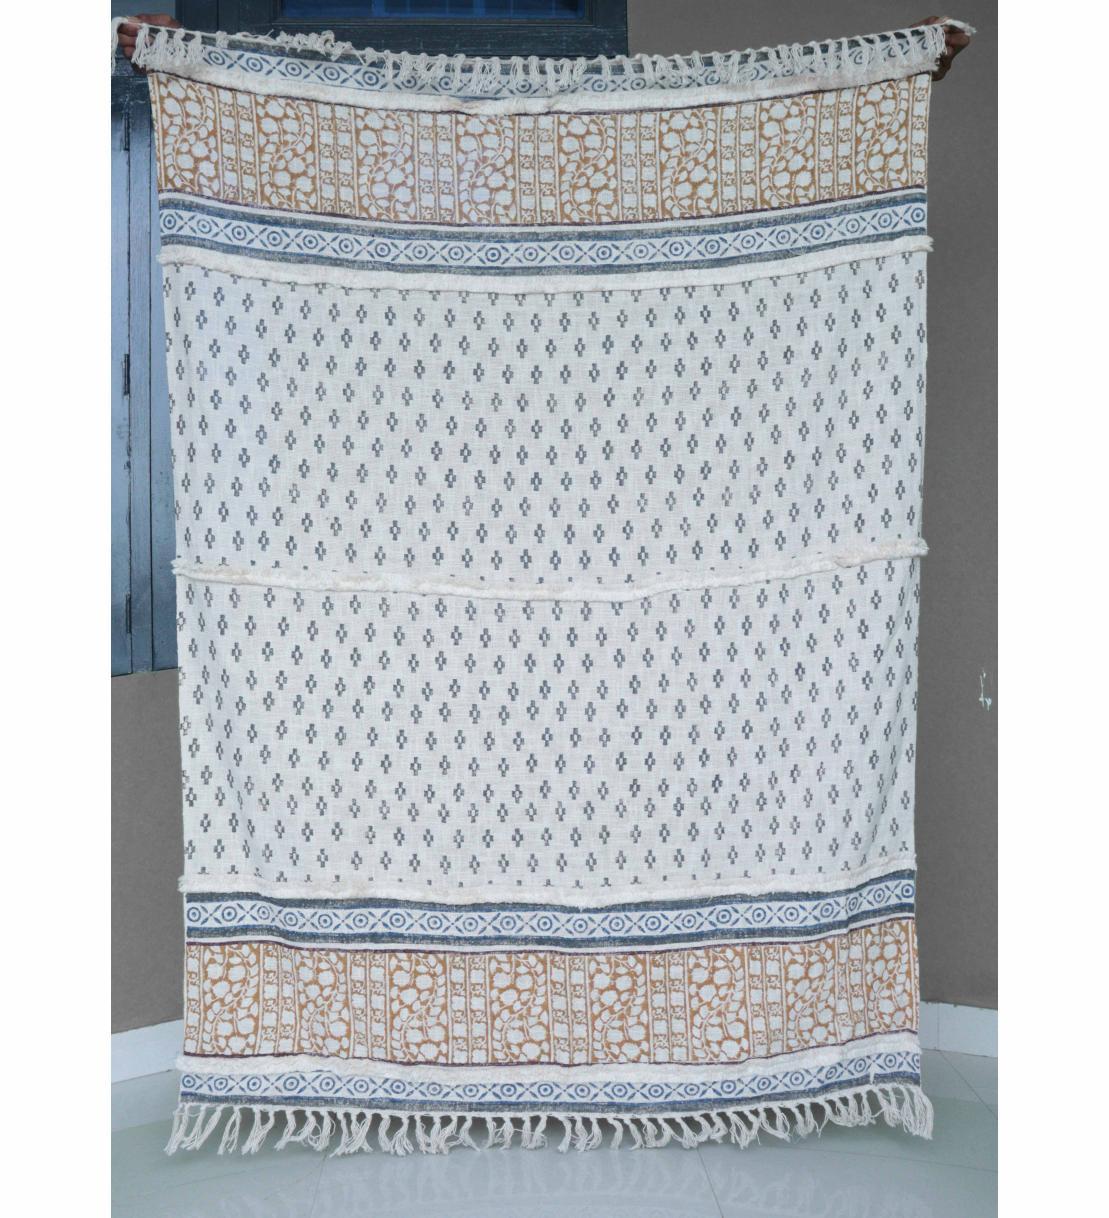 Handwoven Turkish Cotton Blanket with Fringes